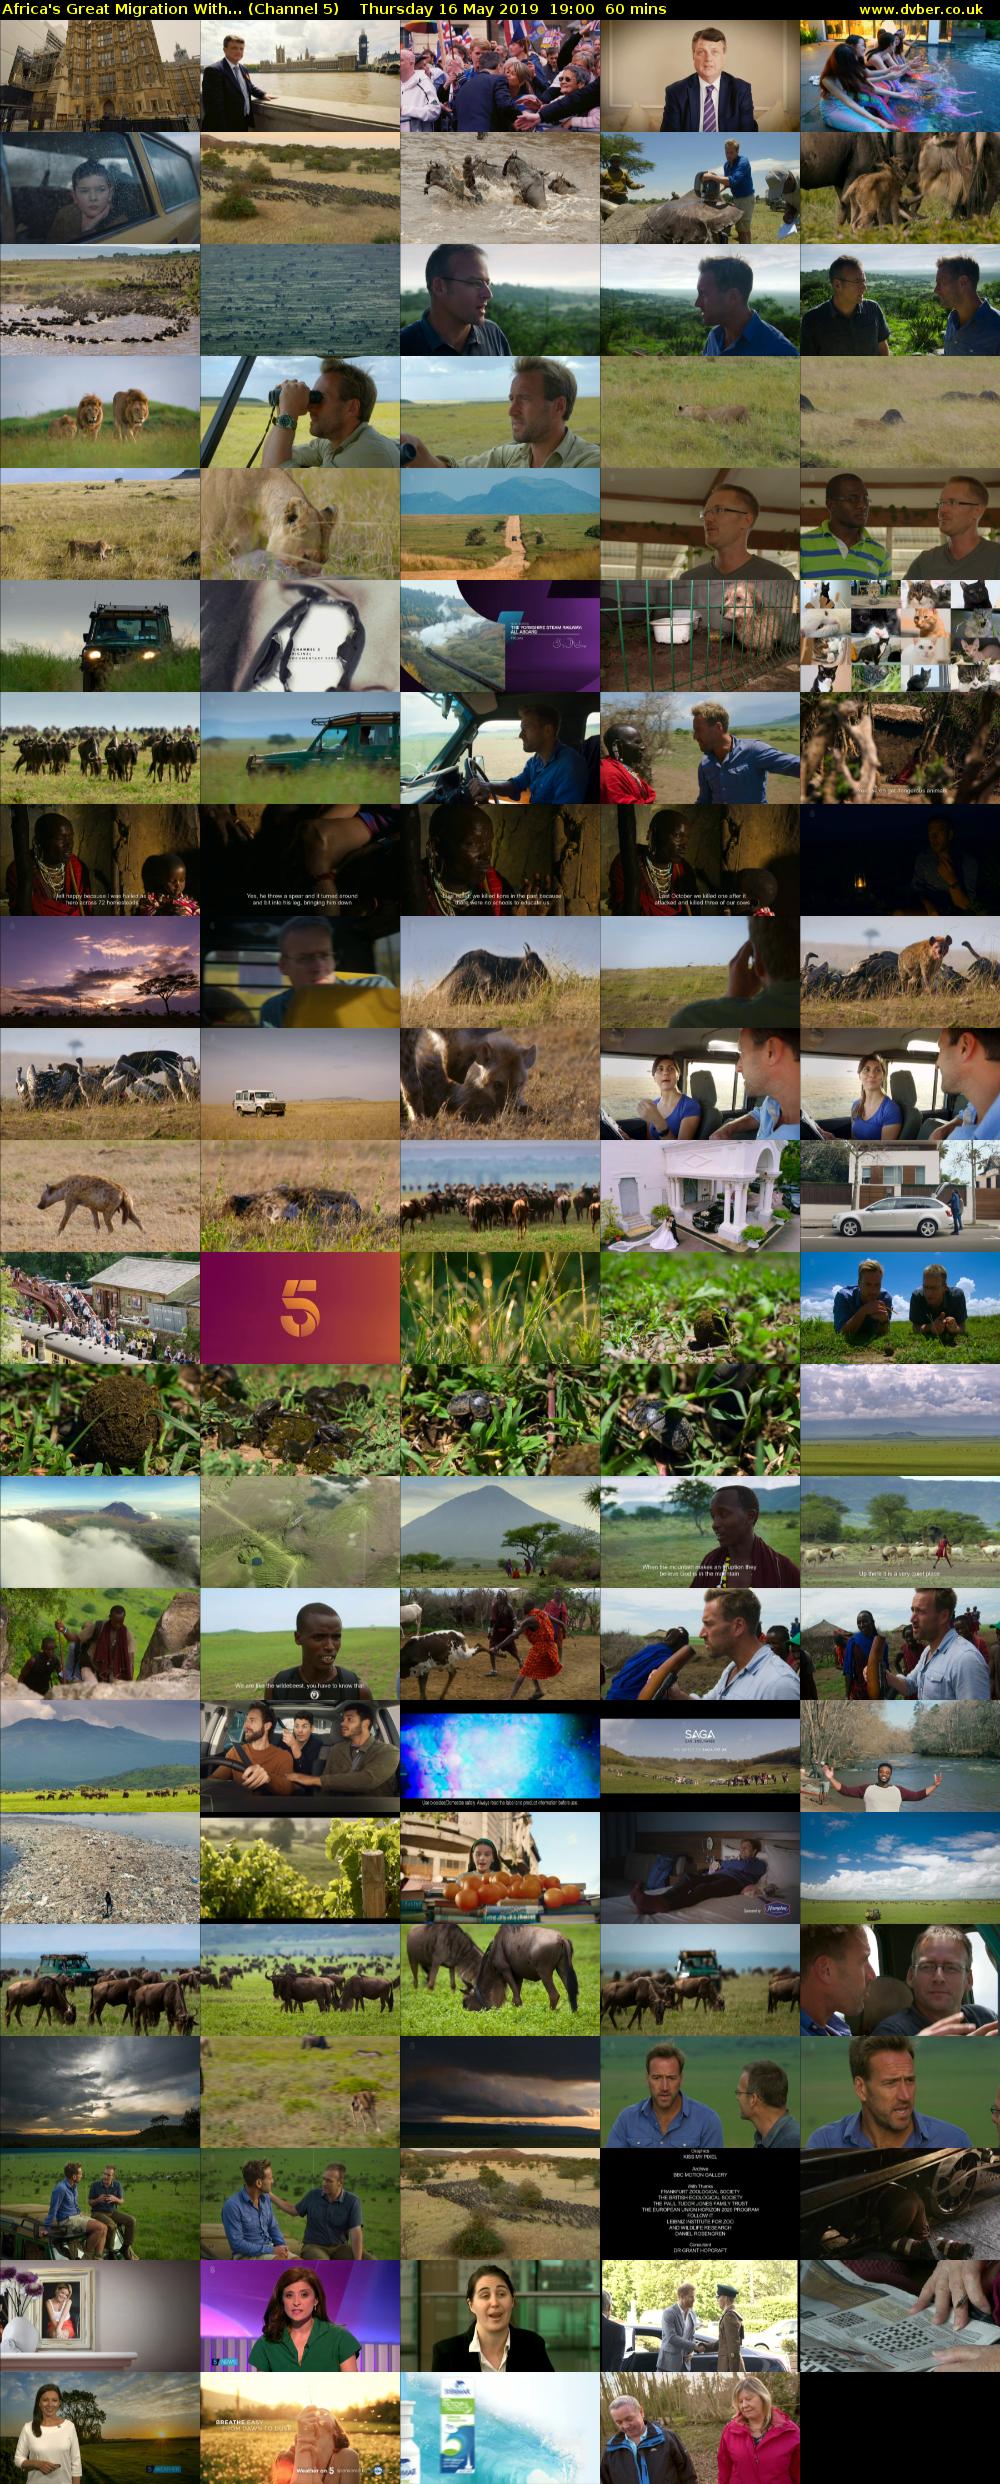 Africa's Great Migration With... (Channel 5) Thursday 16 May 2019 19:00 - 20:00